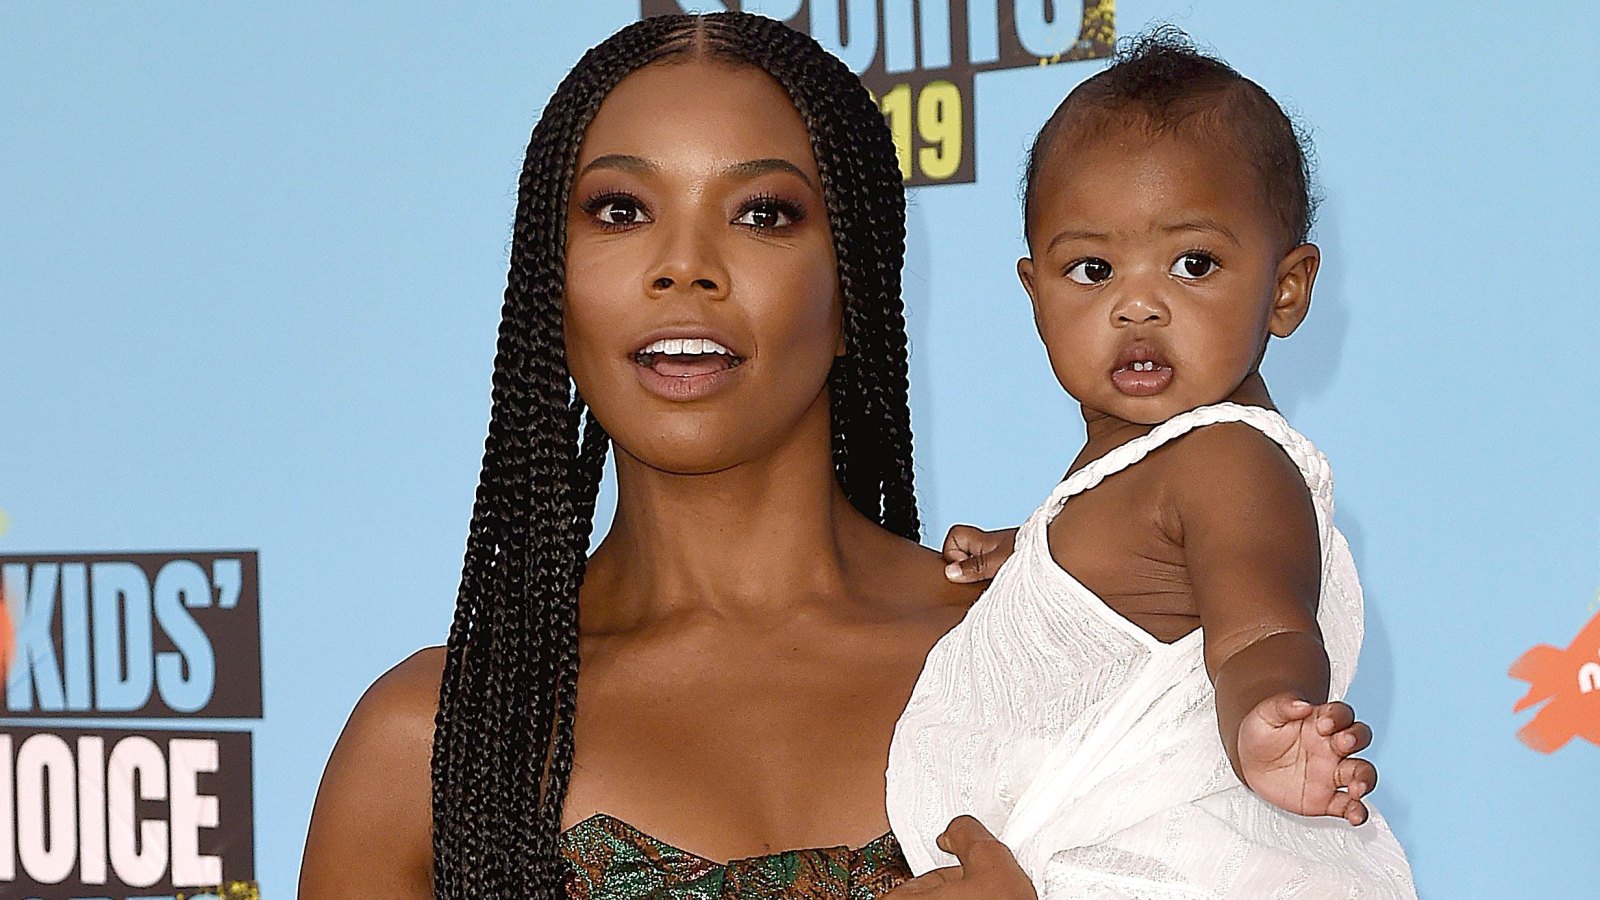 Gabrielle Union's Baby Daughter Channels Her Mom in Cute 'Bring It On' Cheerleader Outfit